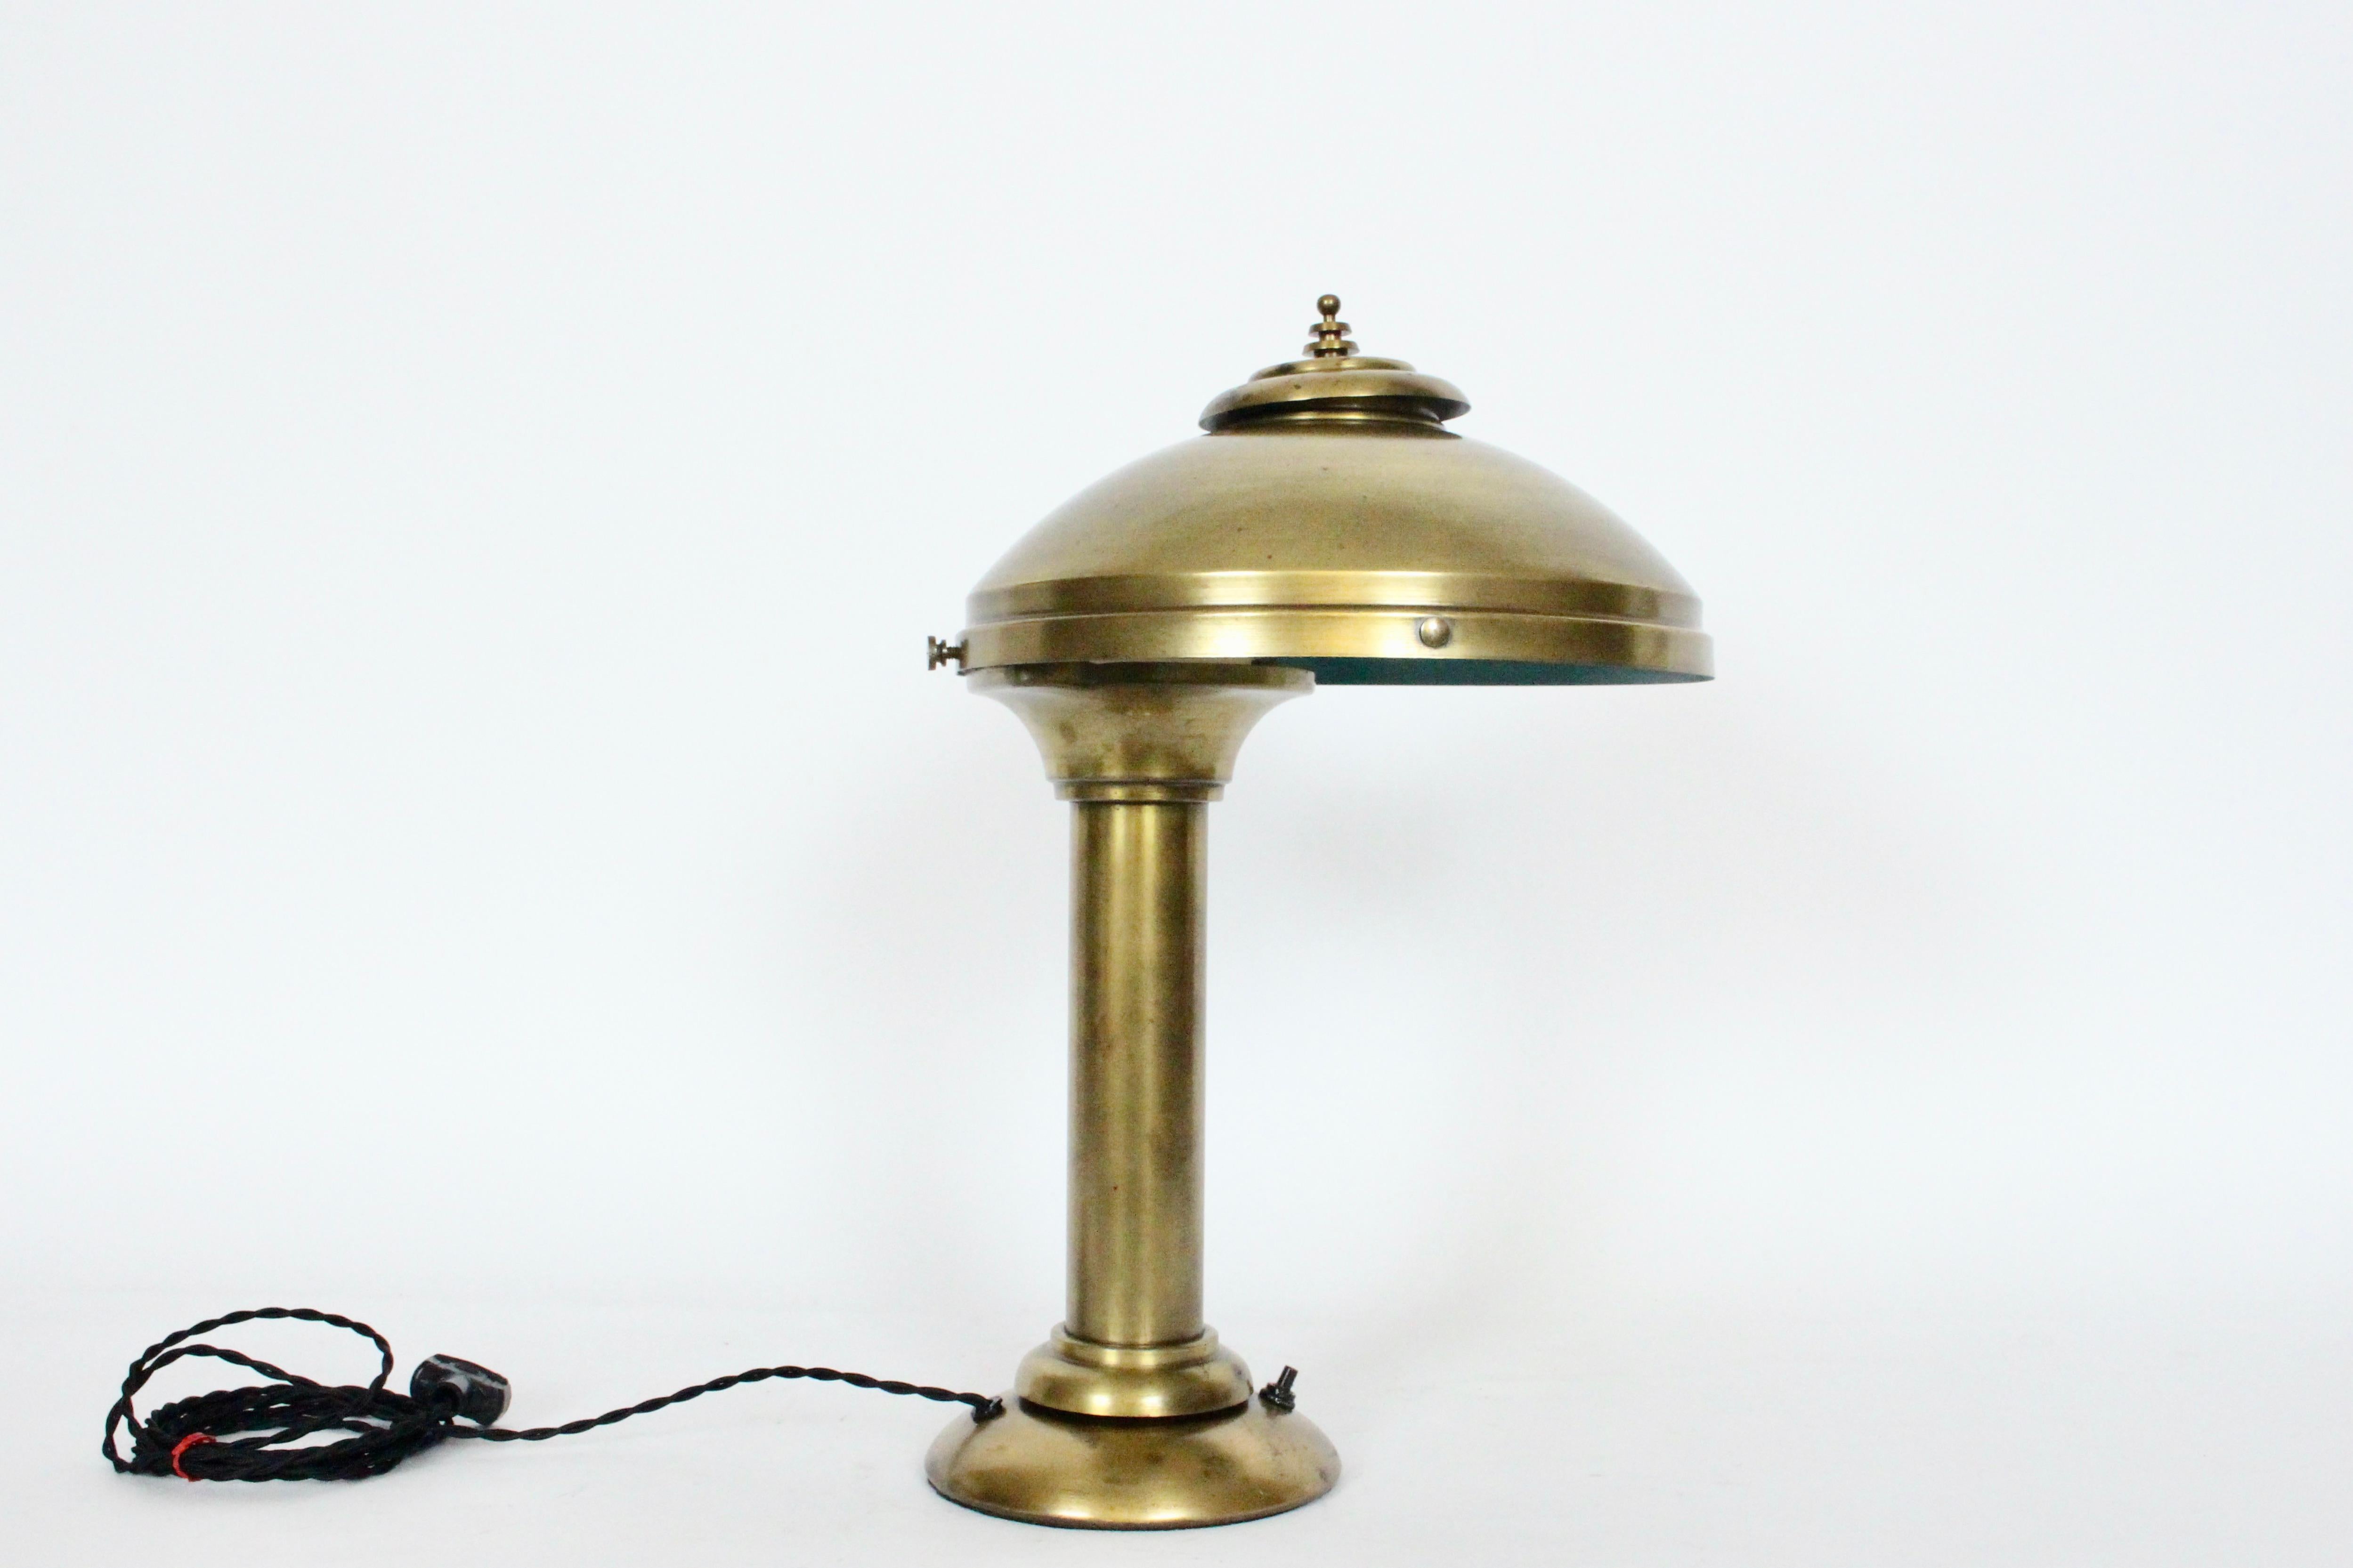 Fairies Mfg. Co. Cantilever All Brass Shaded Desk Lamp, 1920s In Good Condition For Sale In Bainbridge, NY